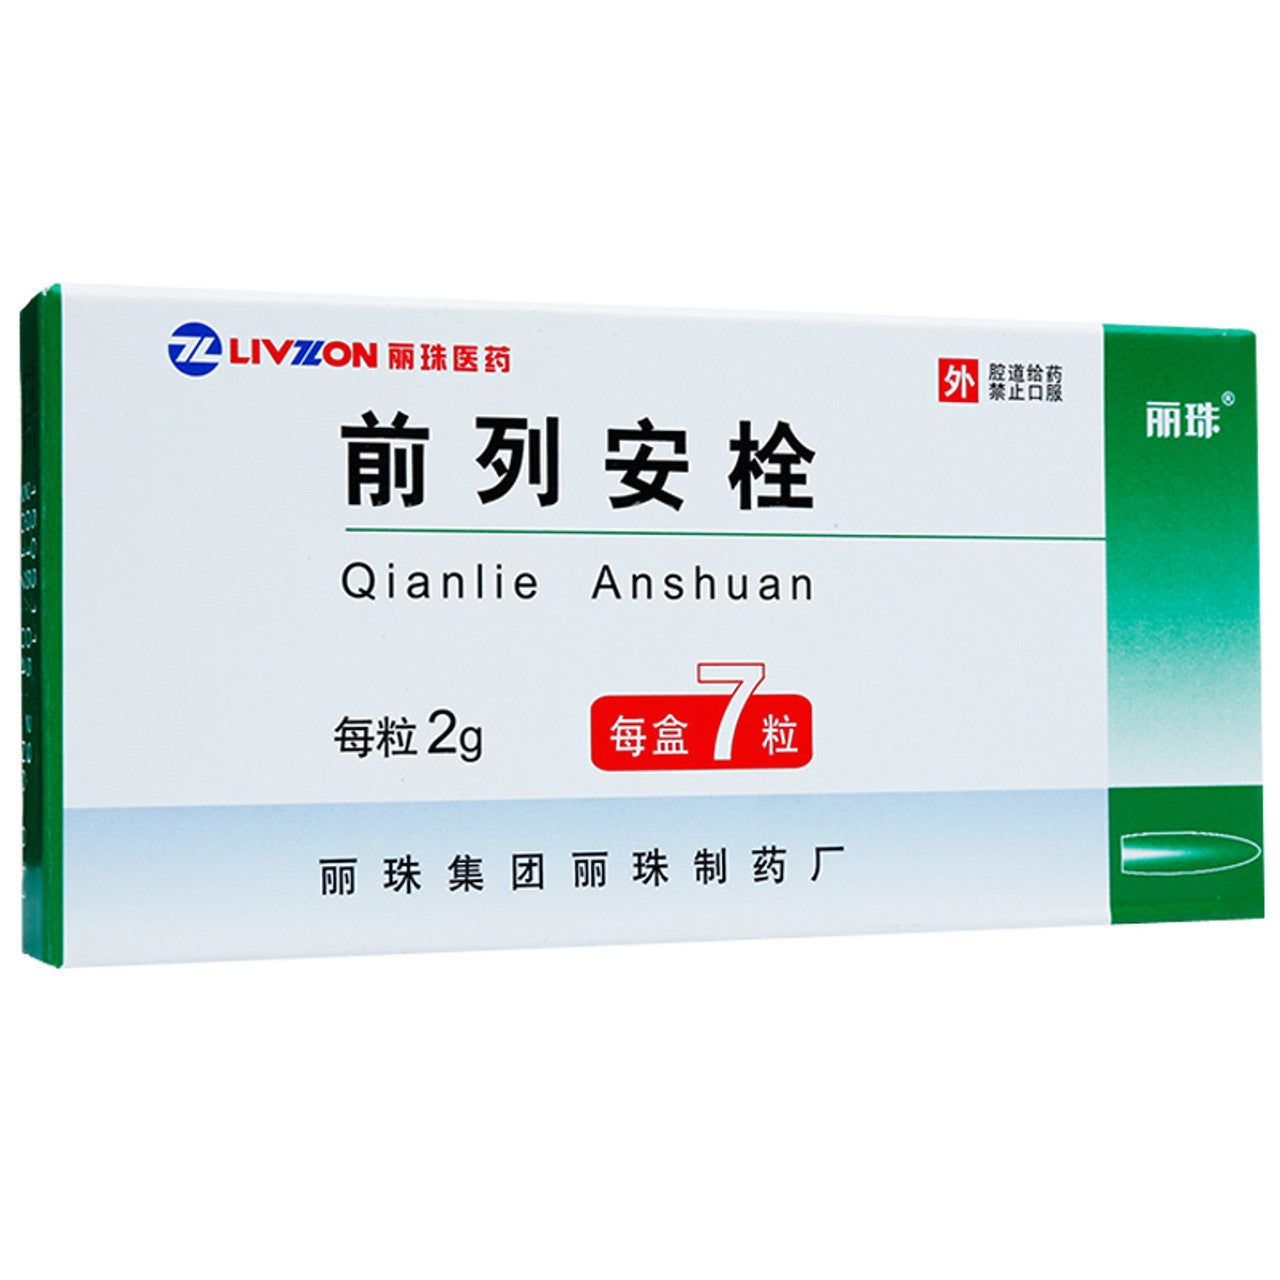 Herbal Suppository. External Use. Brand Lizhu. Qianlieanshuan / Qianlie Anshuan / Qian Lie An Shuan / Qian Lie An Suppository / QianLieAnShuan